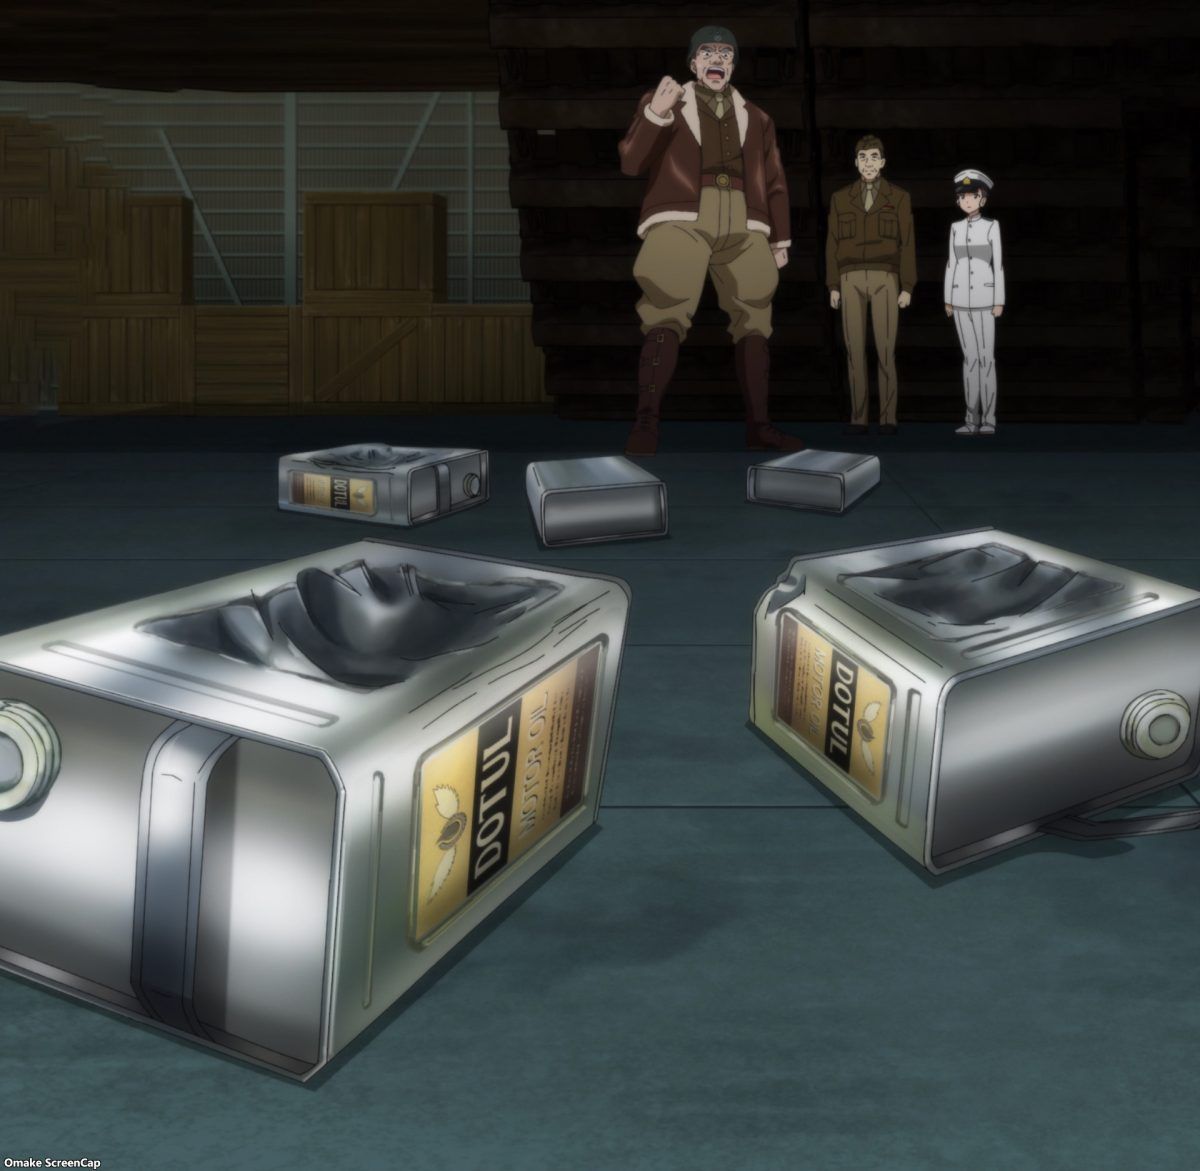 Strike Witches Road To Berlin Episode 10 Patton Punches Motor Oil Cans